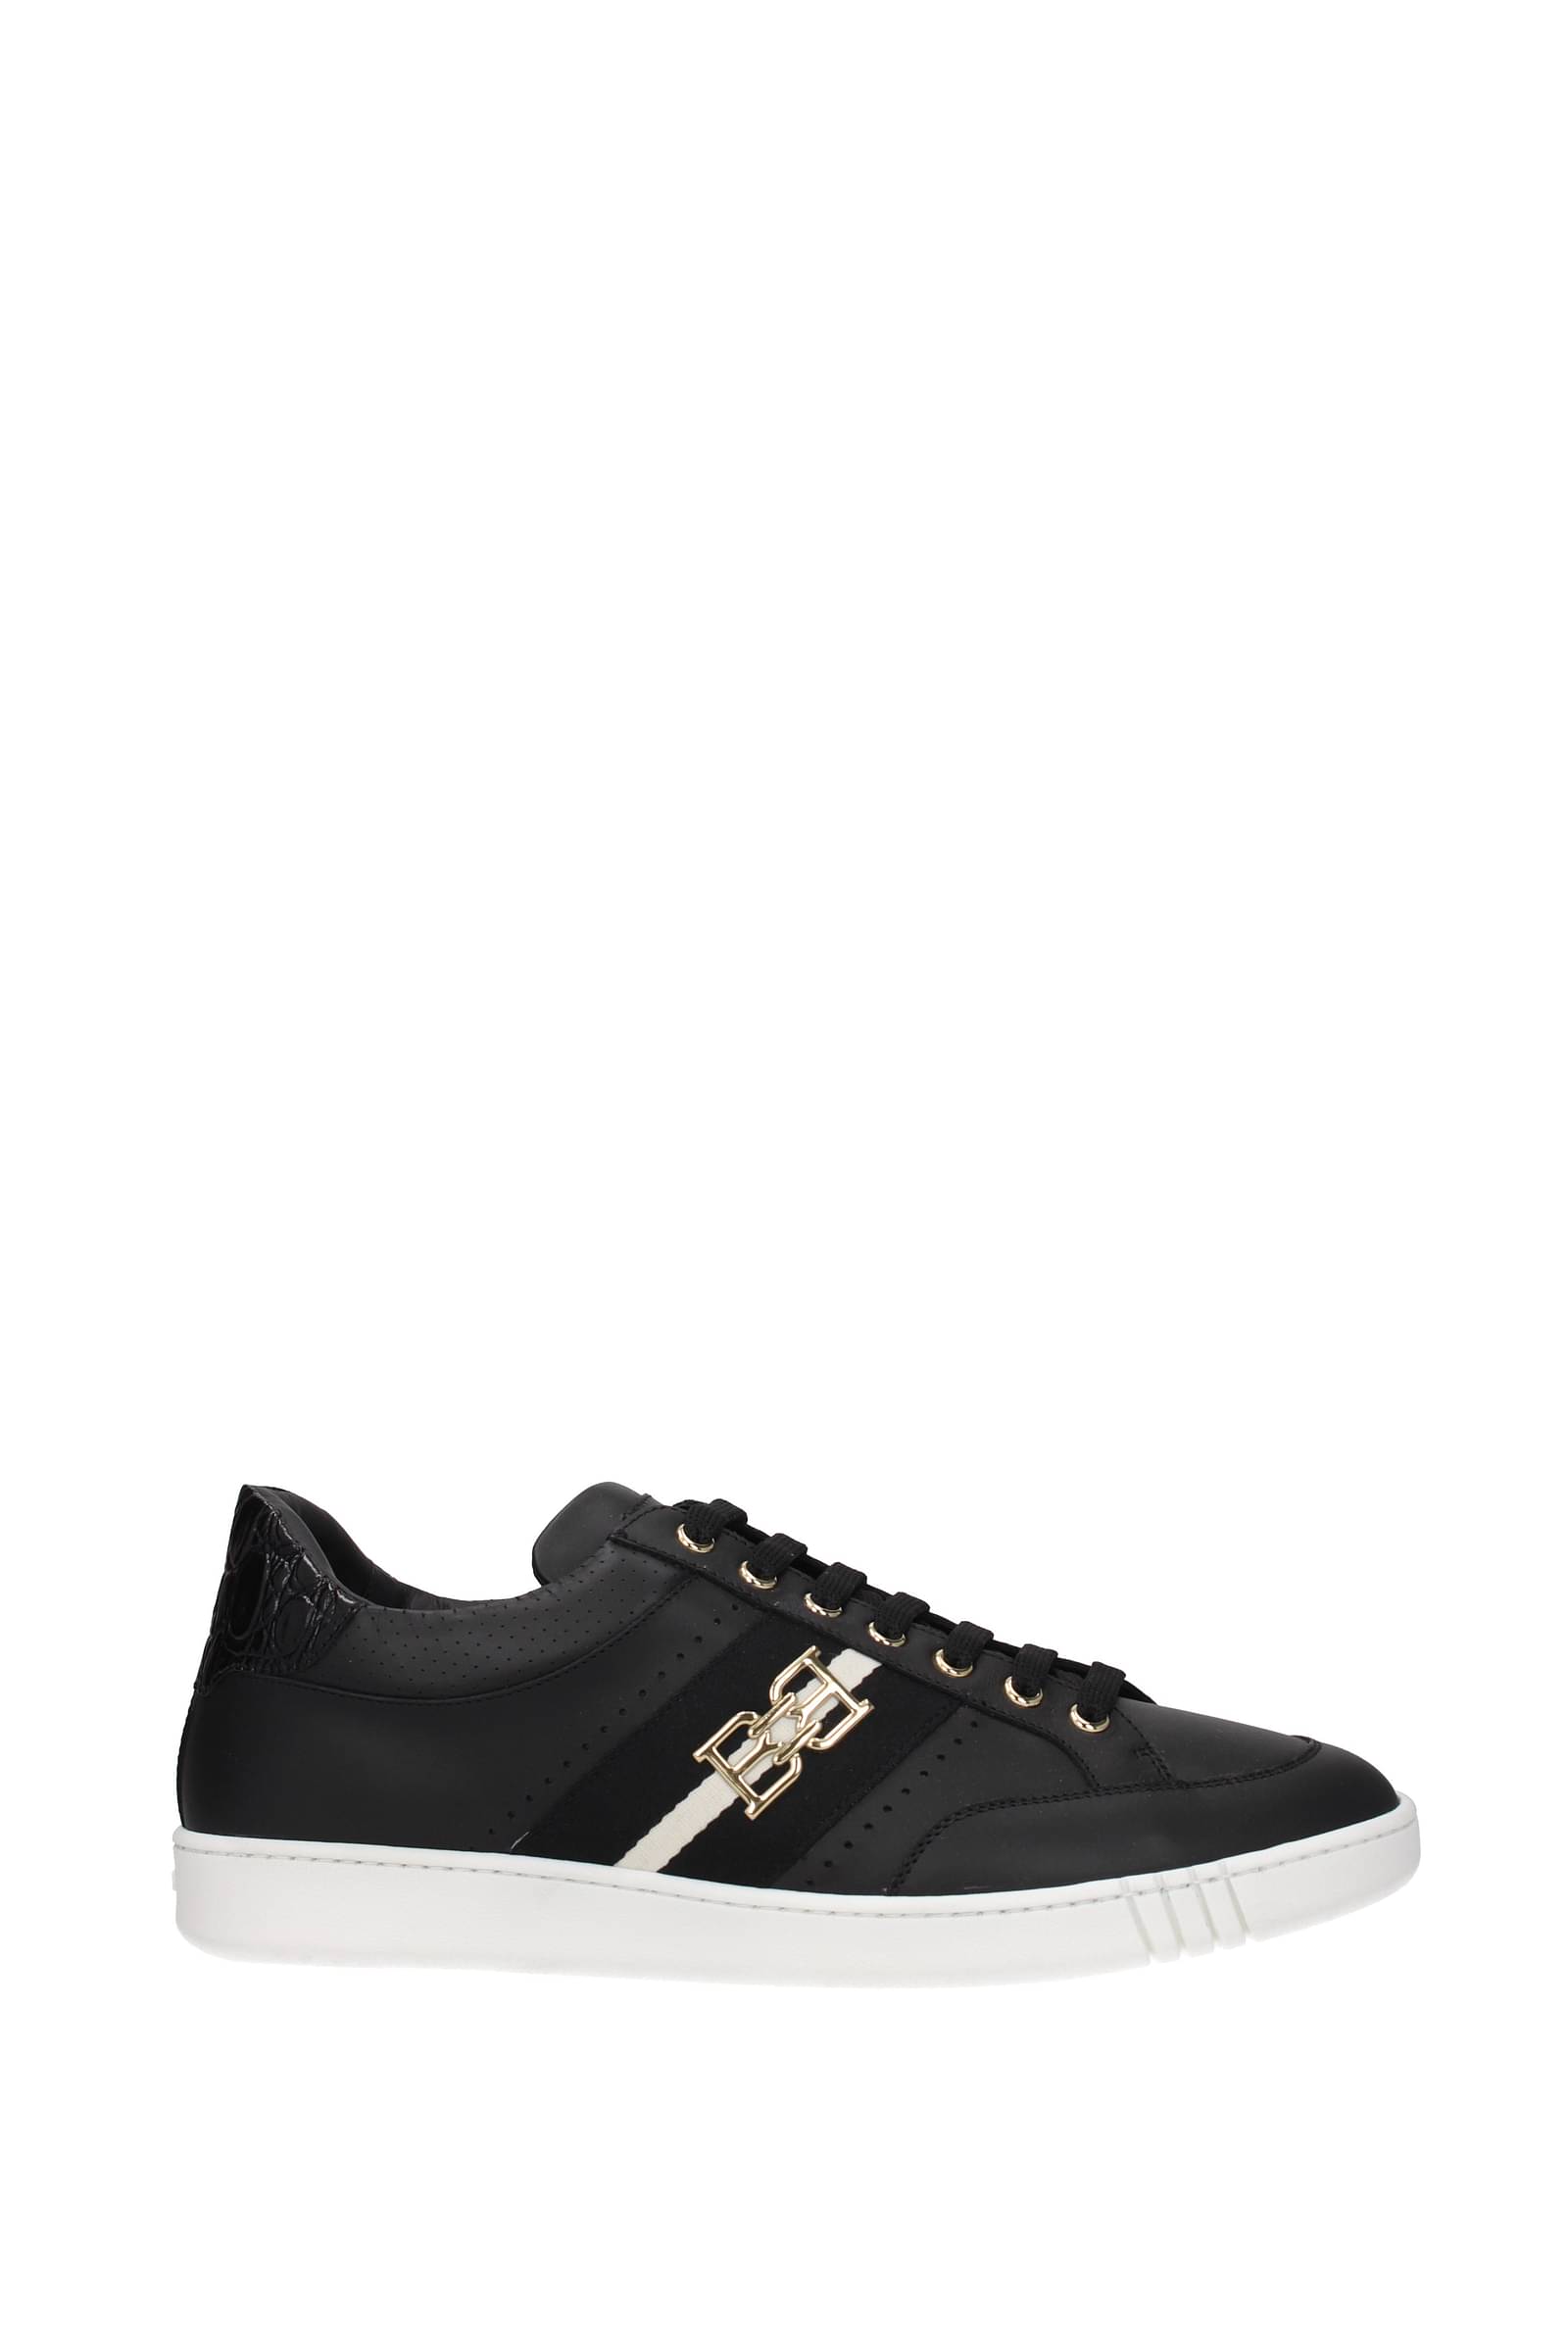 Bally Mitty Colour-Block Leather Low-Top Sneakers, Brand Size 6 ( US Size 7  ) MSK02V VT153 I5C2 - Shoes - Jomashop